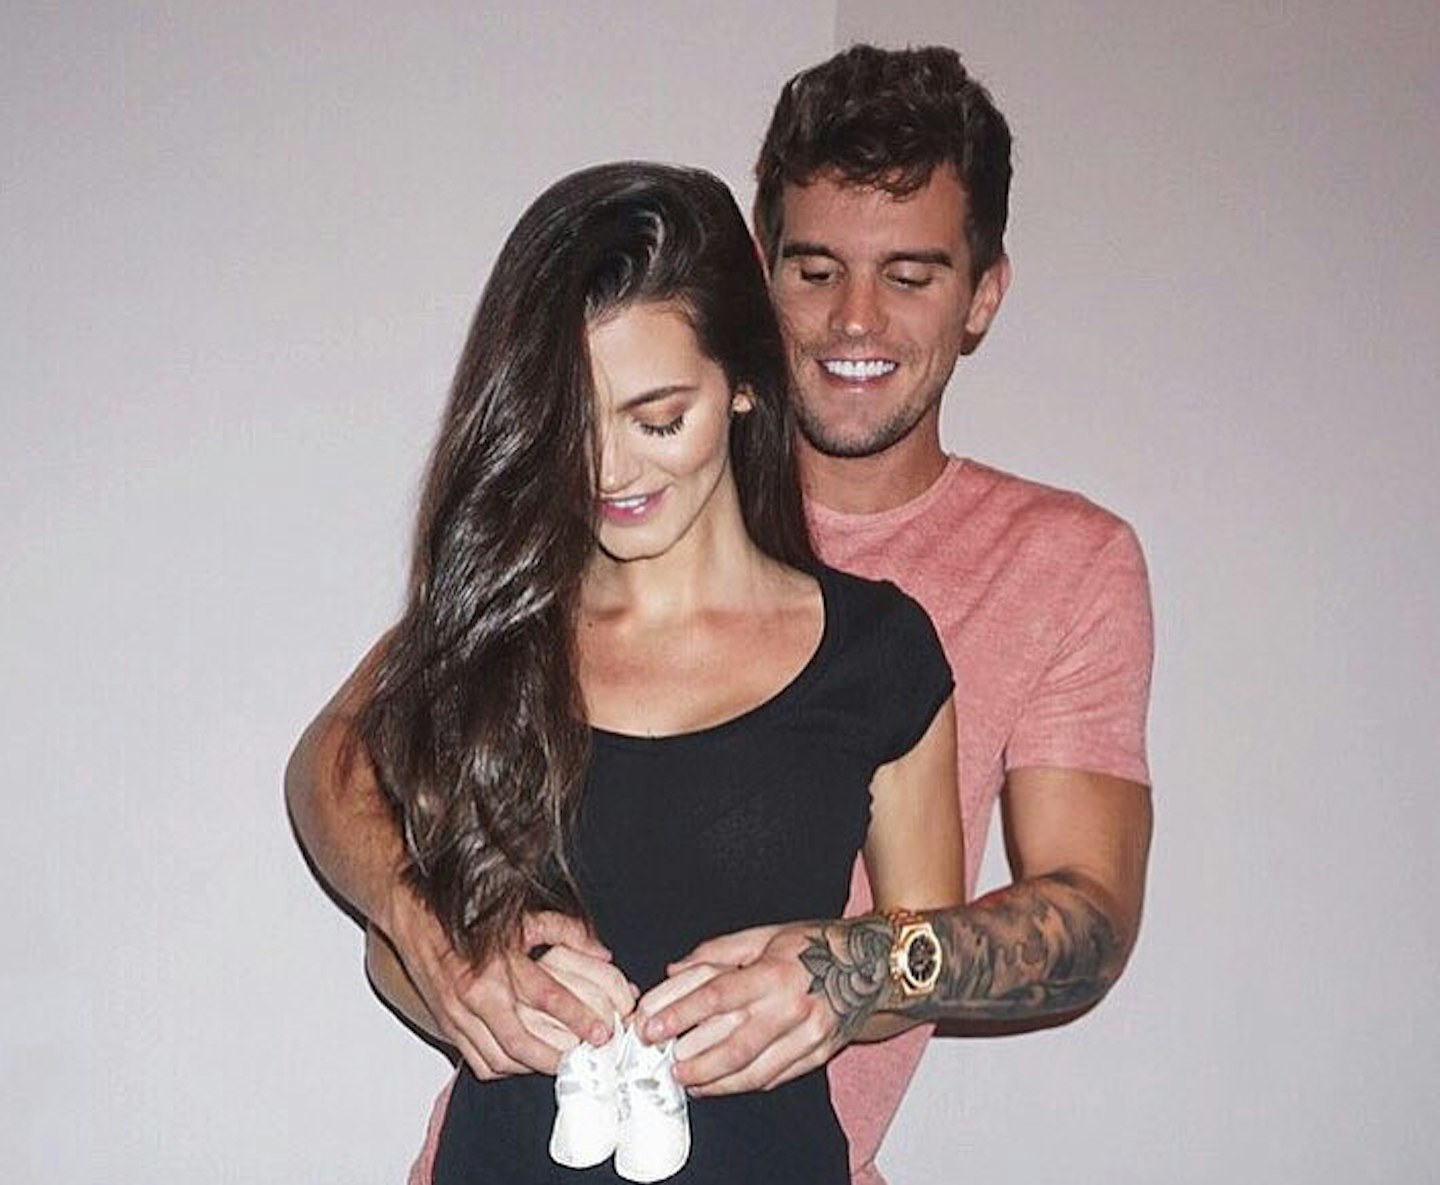 Gaz Beadle and Emma McVey to welcome baby boy